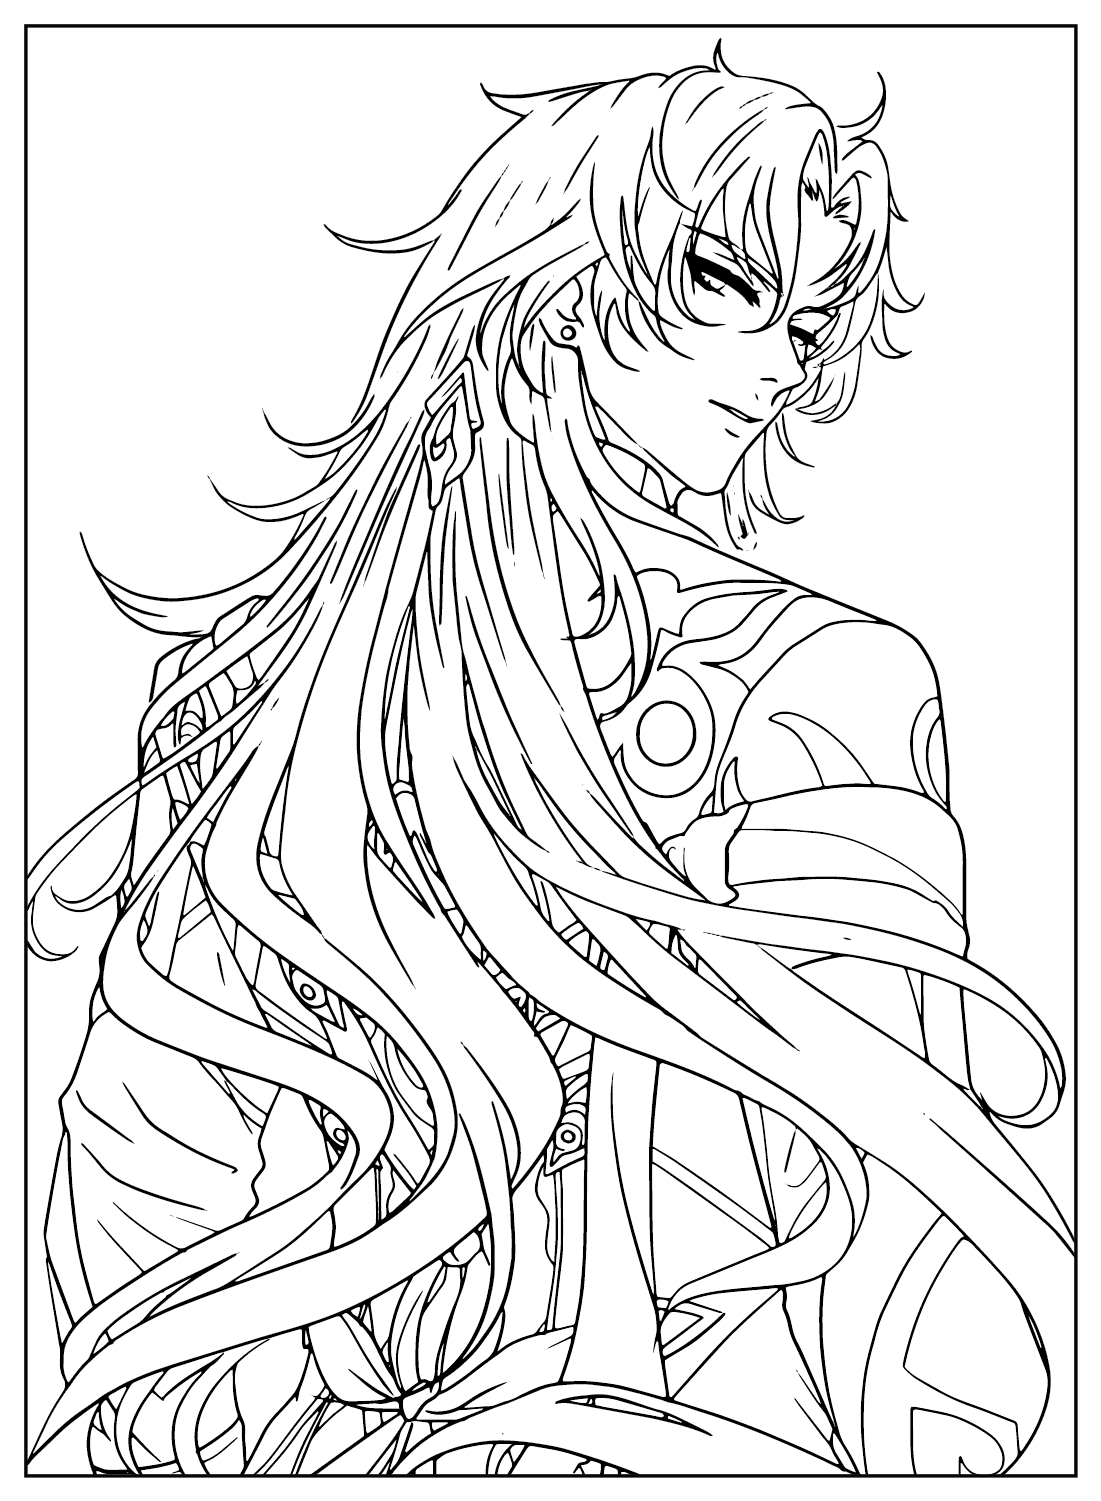 Blade Coloring Page Free from Honkai: Star Rail